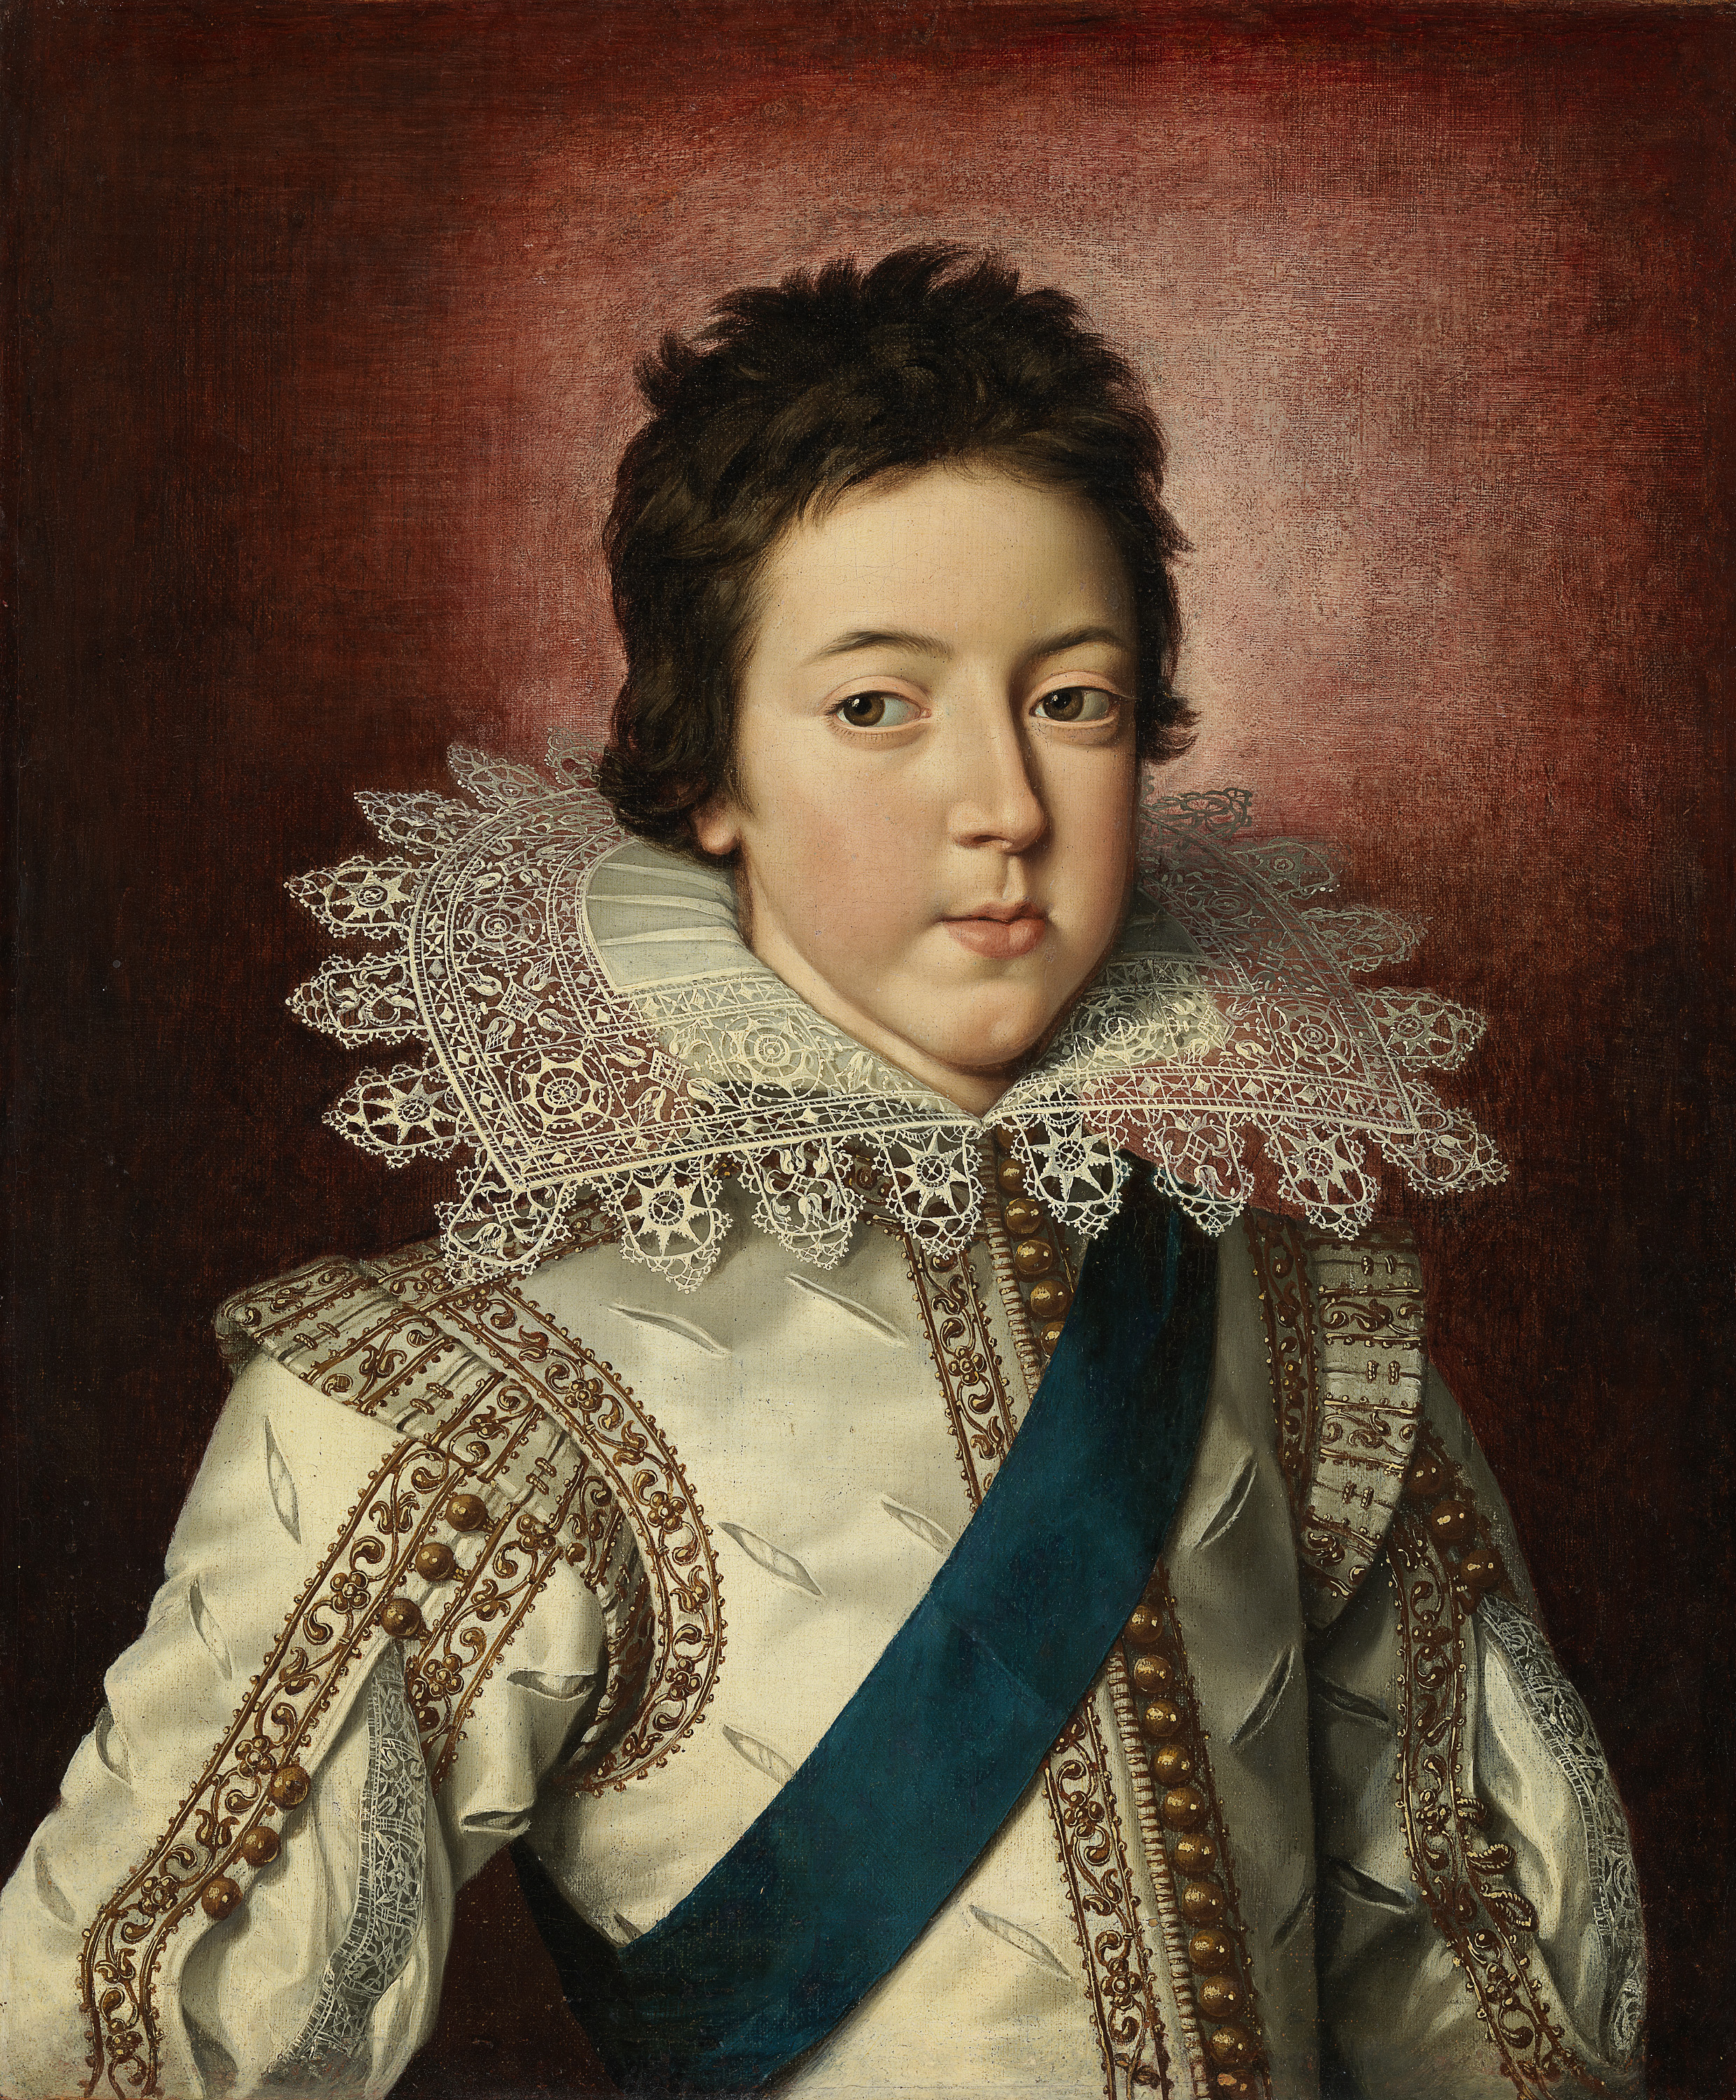 A 17th century Flemish Baroque portrait of a boy in a frill, looking serious and to the side